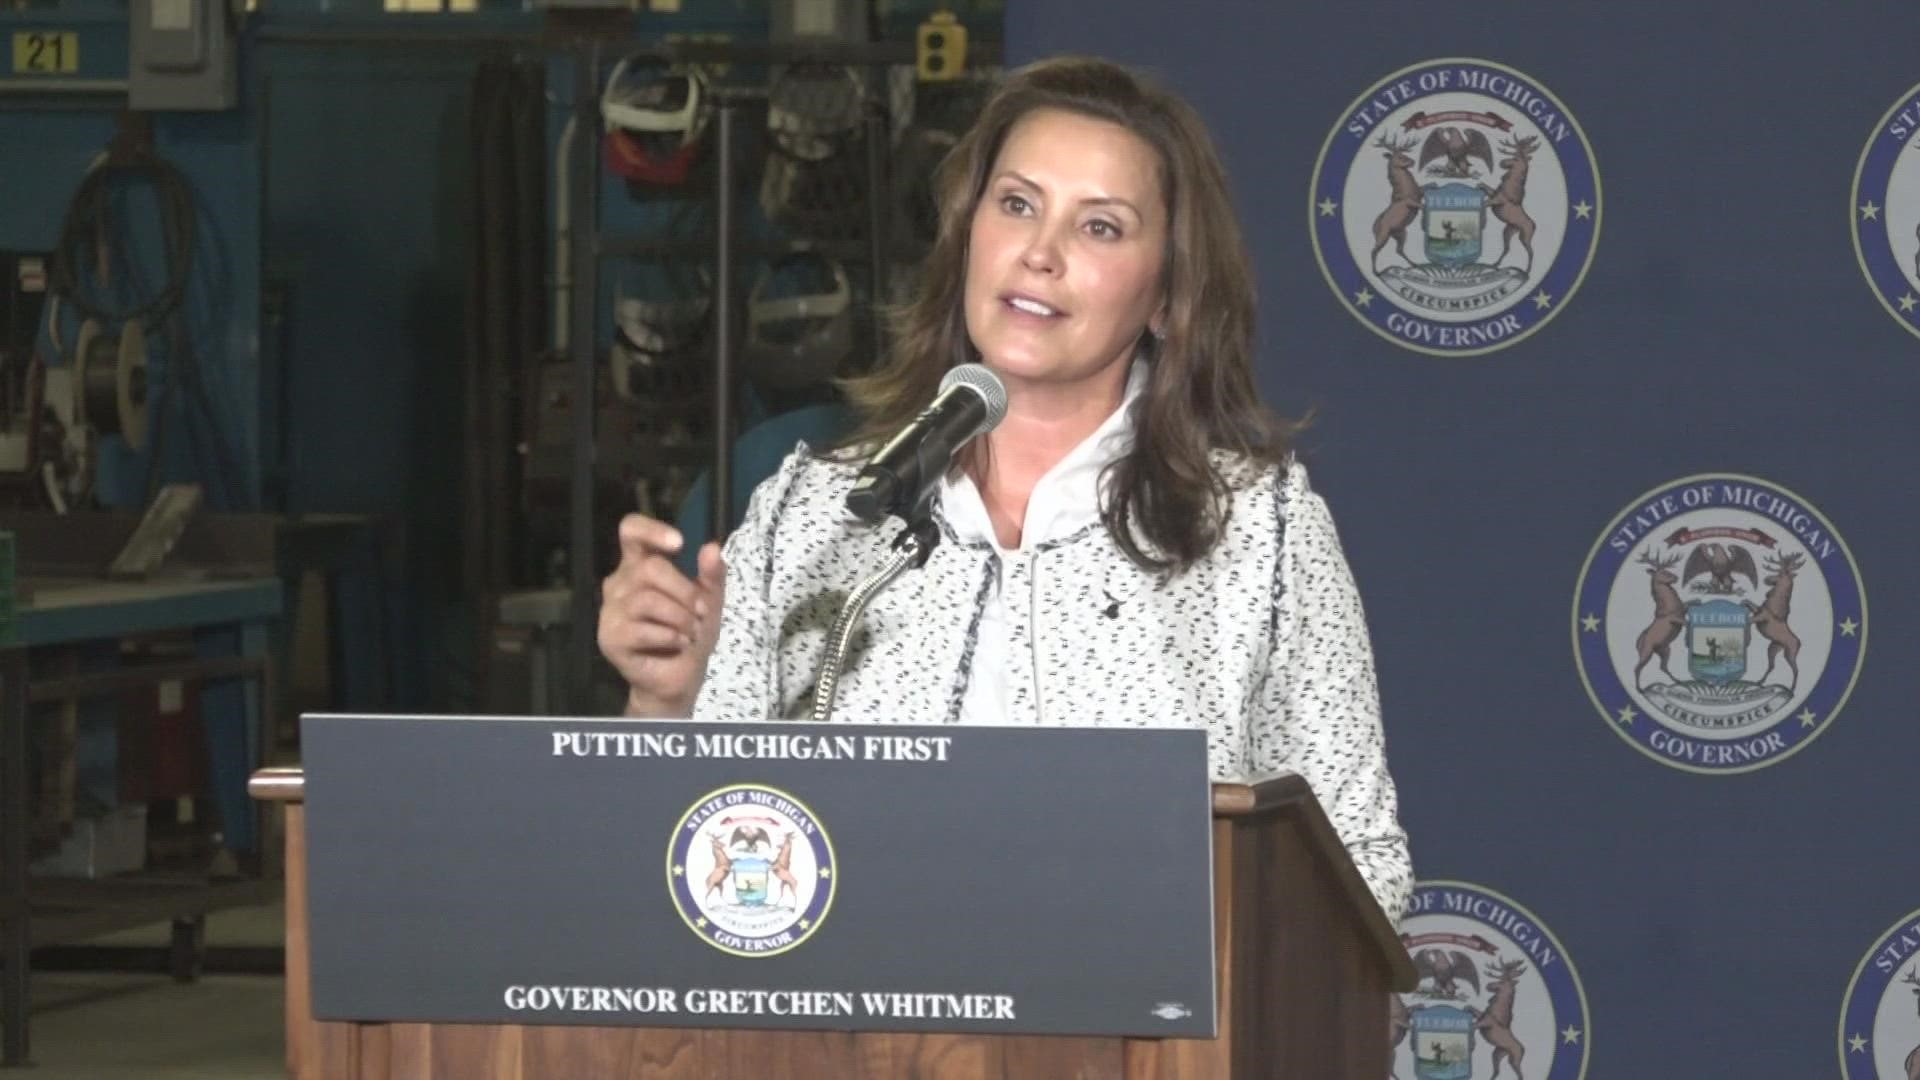 While Gov. Gretchen Whitmer does not anticipate a statewide mask order, she applauded school districts that have embraced masking policies.